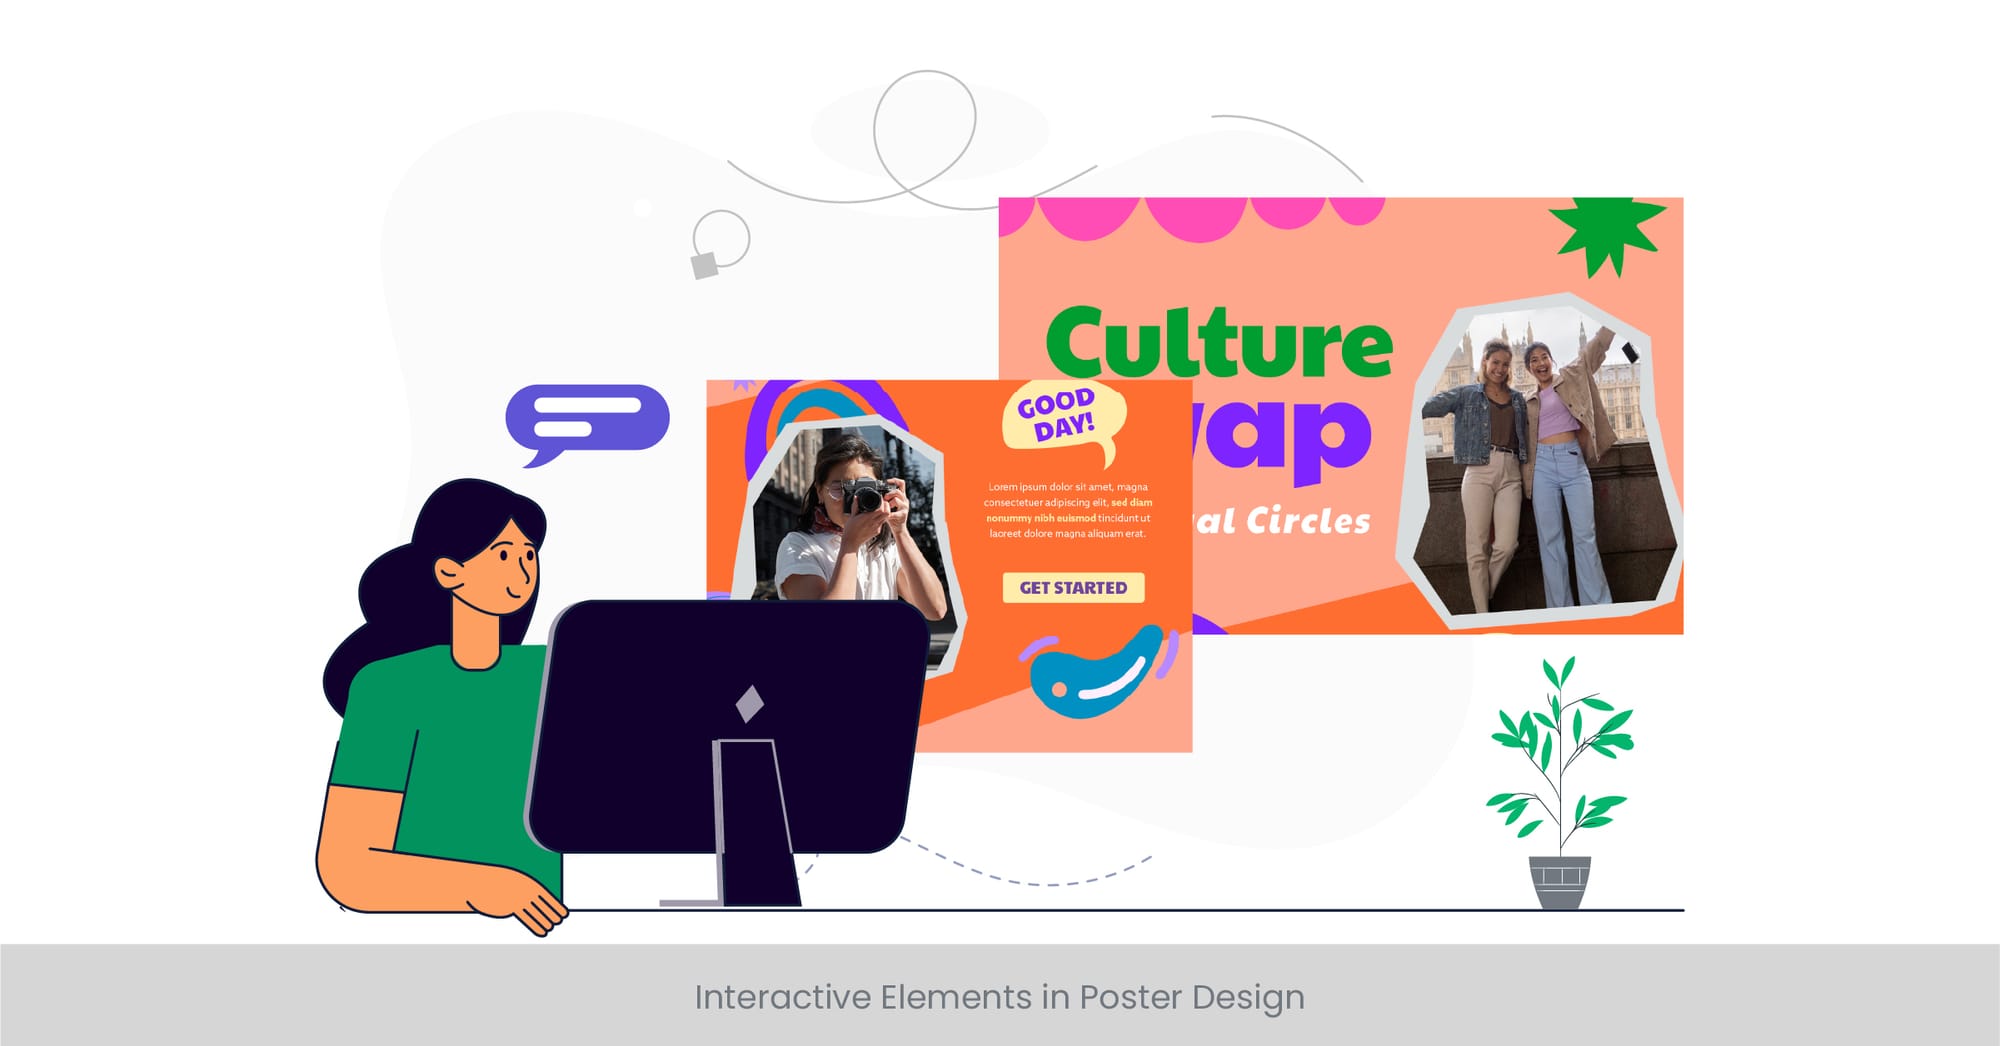 Interactive Elements in Poster Design